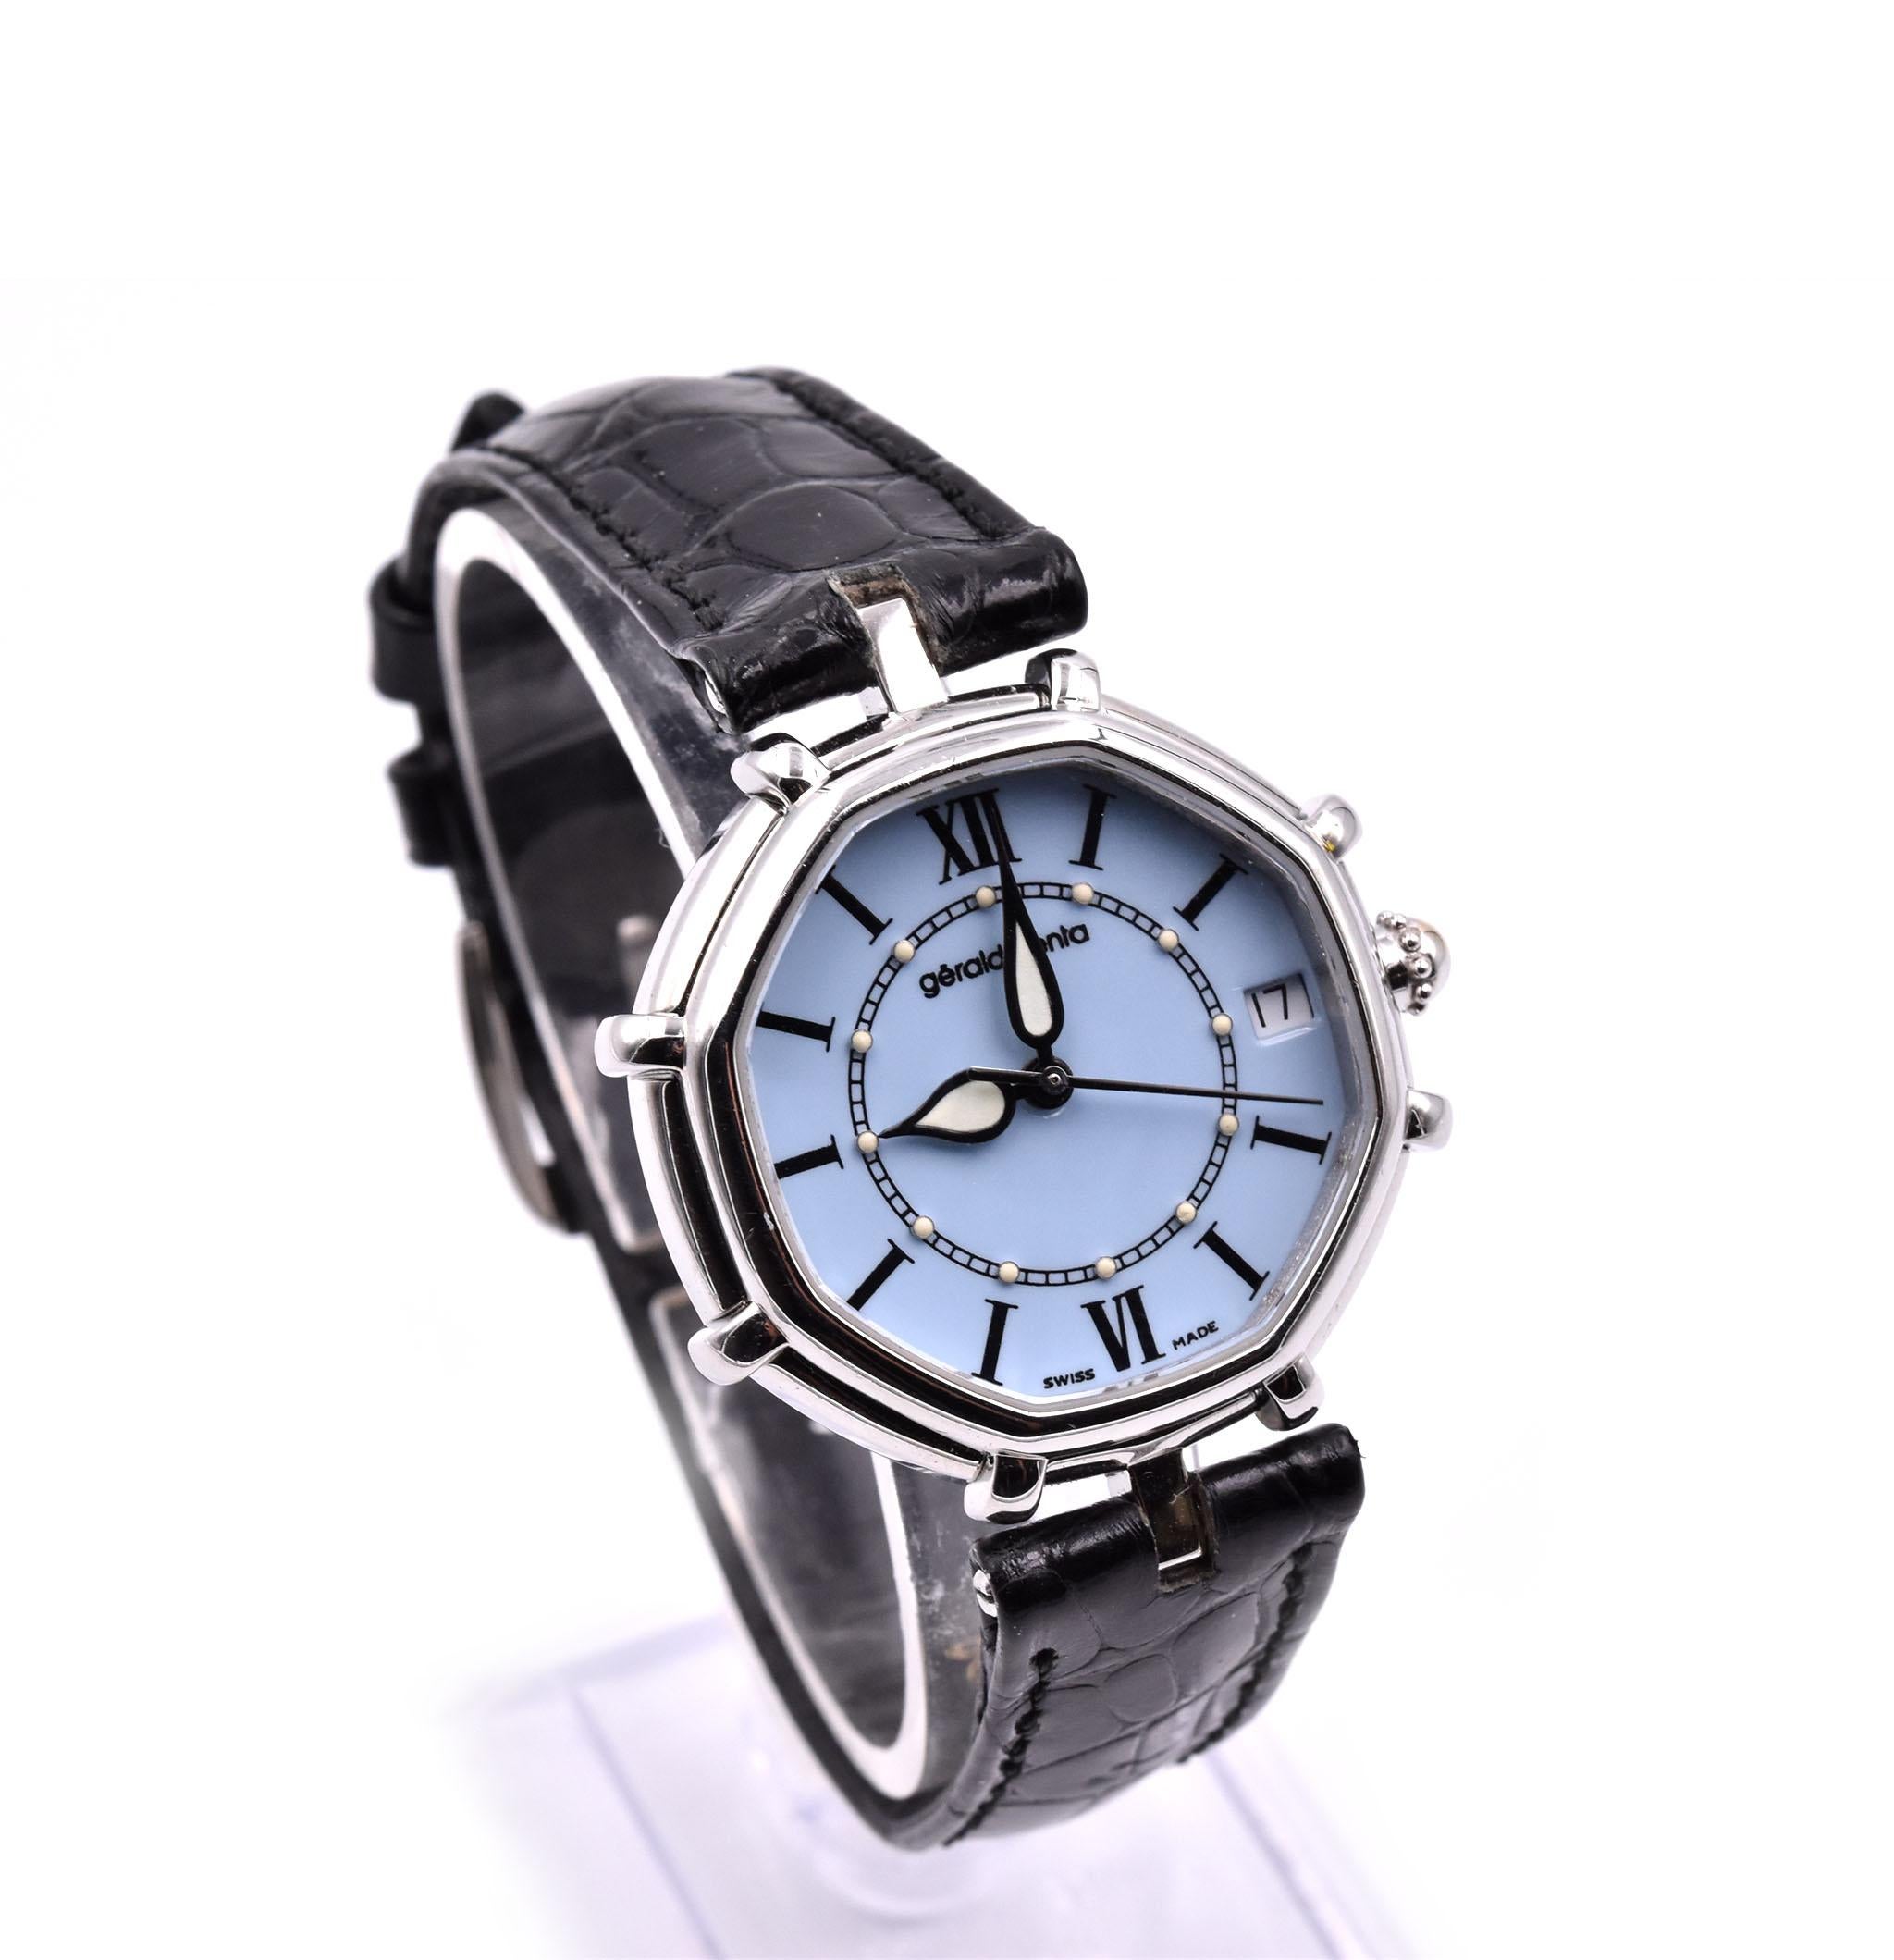 Movement: quartz
Function: hours, minutes
Case: 31mm octagon stainless steel case, sapphire protective crystal, push/pull crown
Band: black alligator leather strap with stainless steel tang buckle
Dial: blue dial with luminescent hour markers, Roman